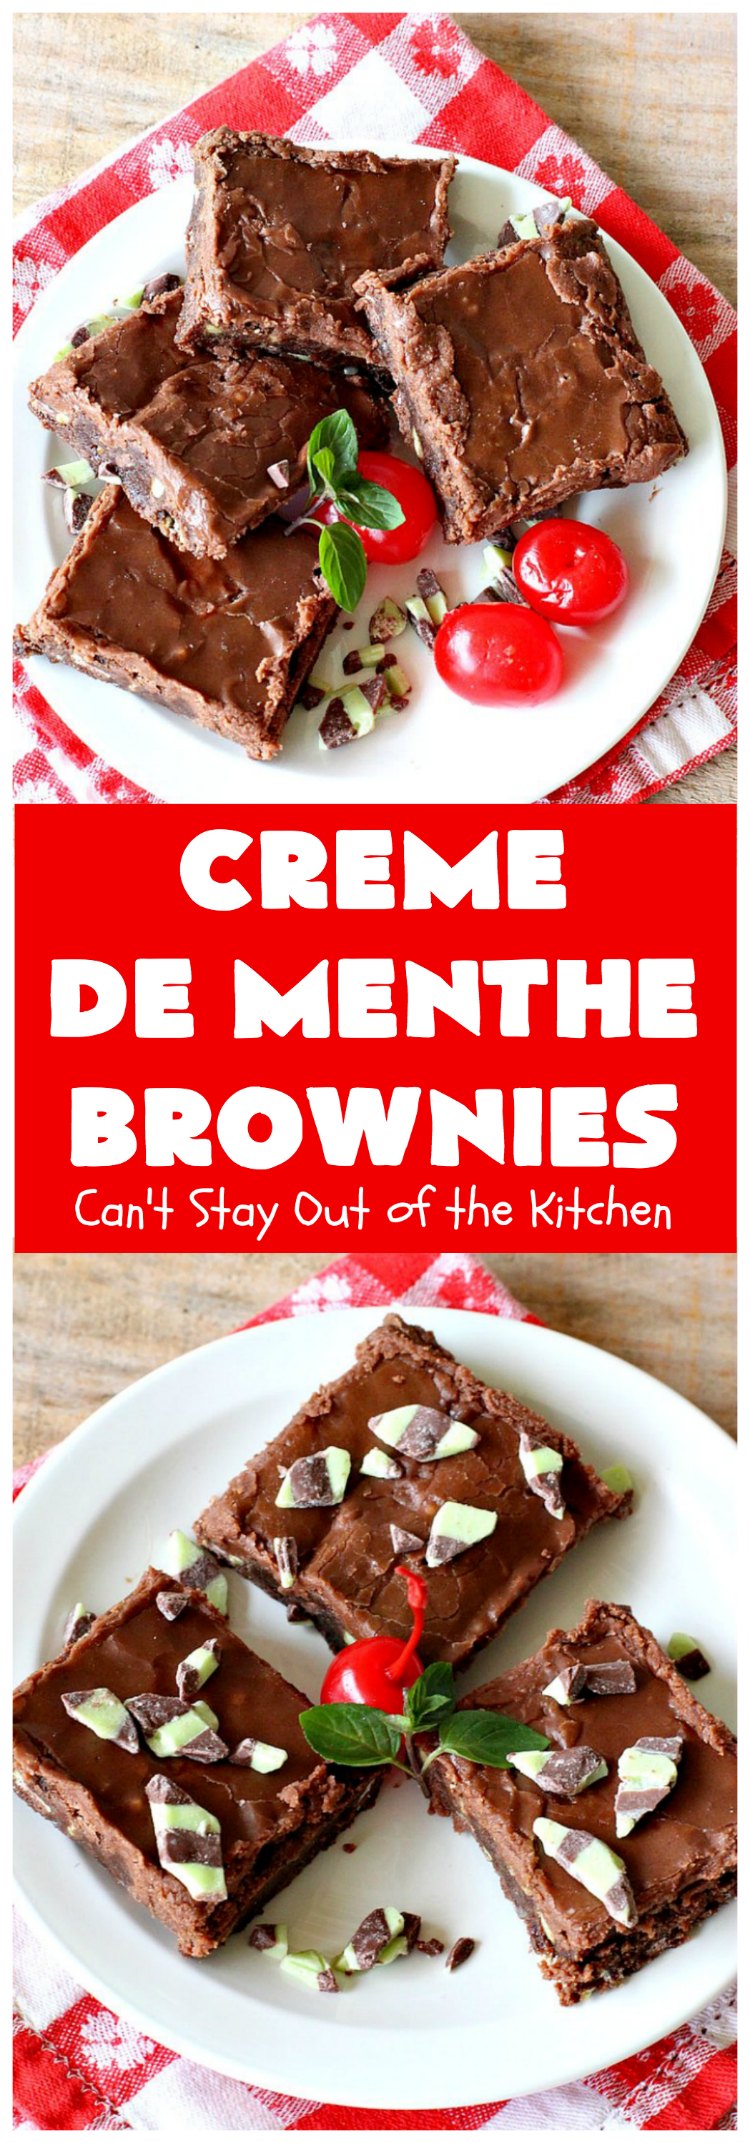 Creme De Menthe Brownies | Can't Stay Out of the Kitchen | these amazing #brownies include #chocolate & #CremeDeMenthe baking chips. They're topped with a luscious #fudge frosting. Perfect for #holiday #baking, #tailgating parties or a #ChristmasCookieExchange. #dessert #ChocolateDessert #HolidayDessert #cookie #CremeDeMentheBrownies